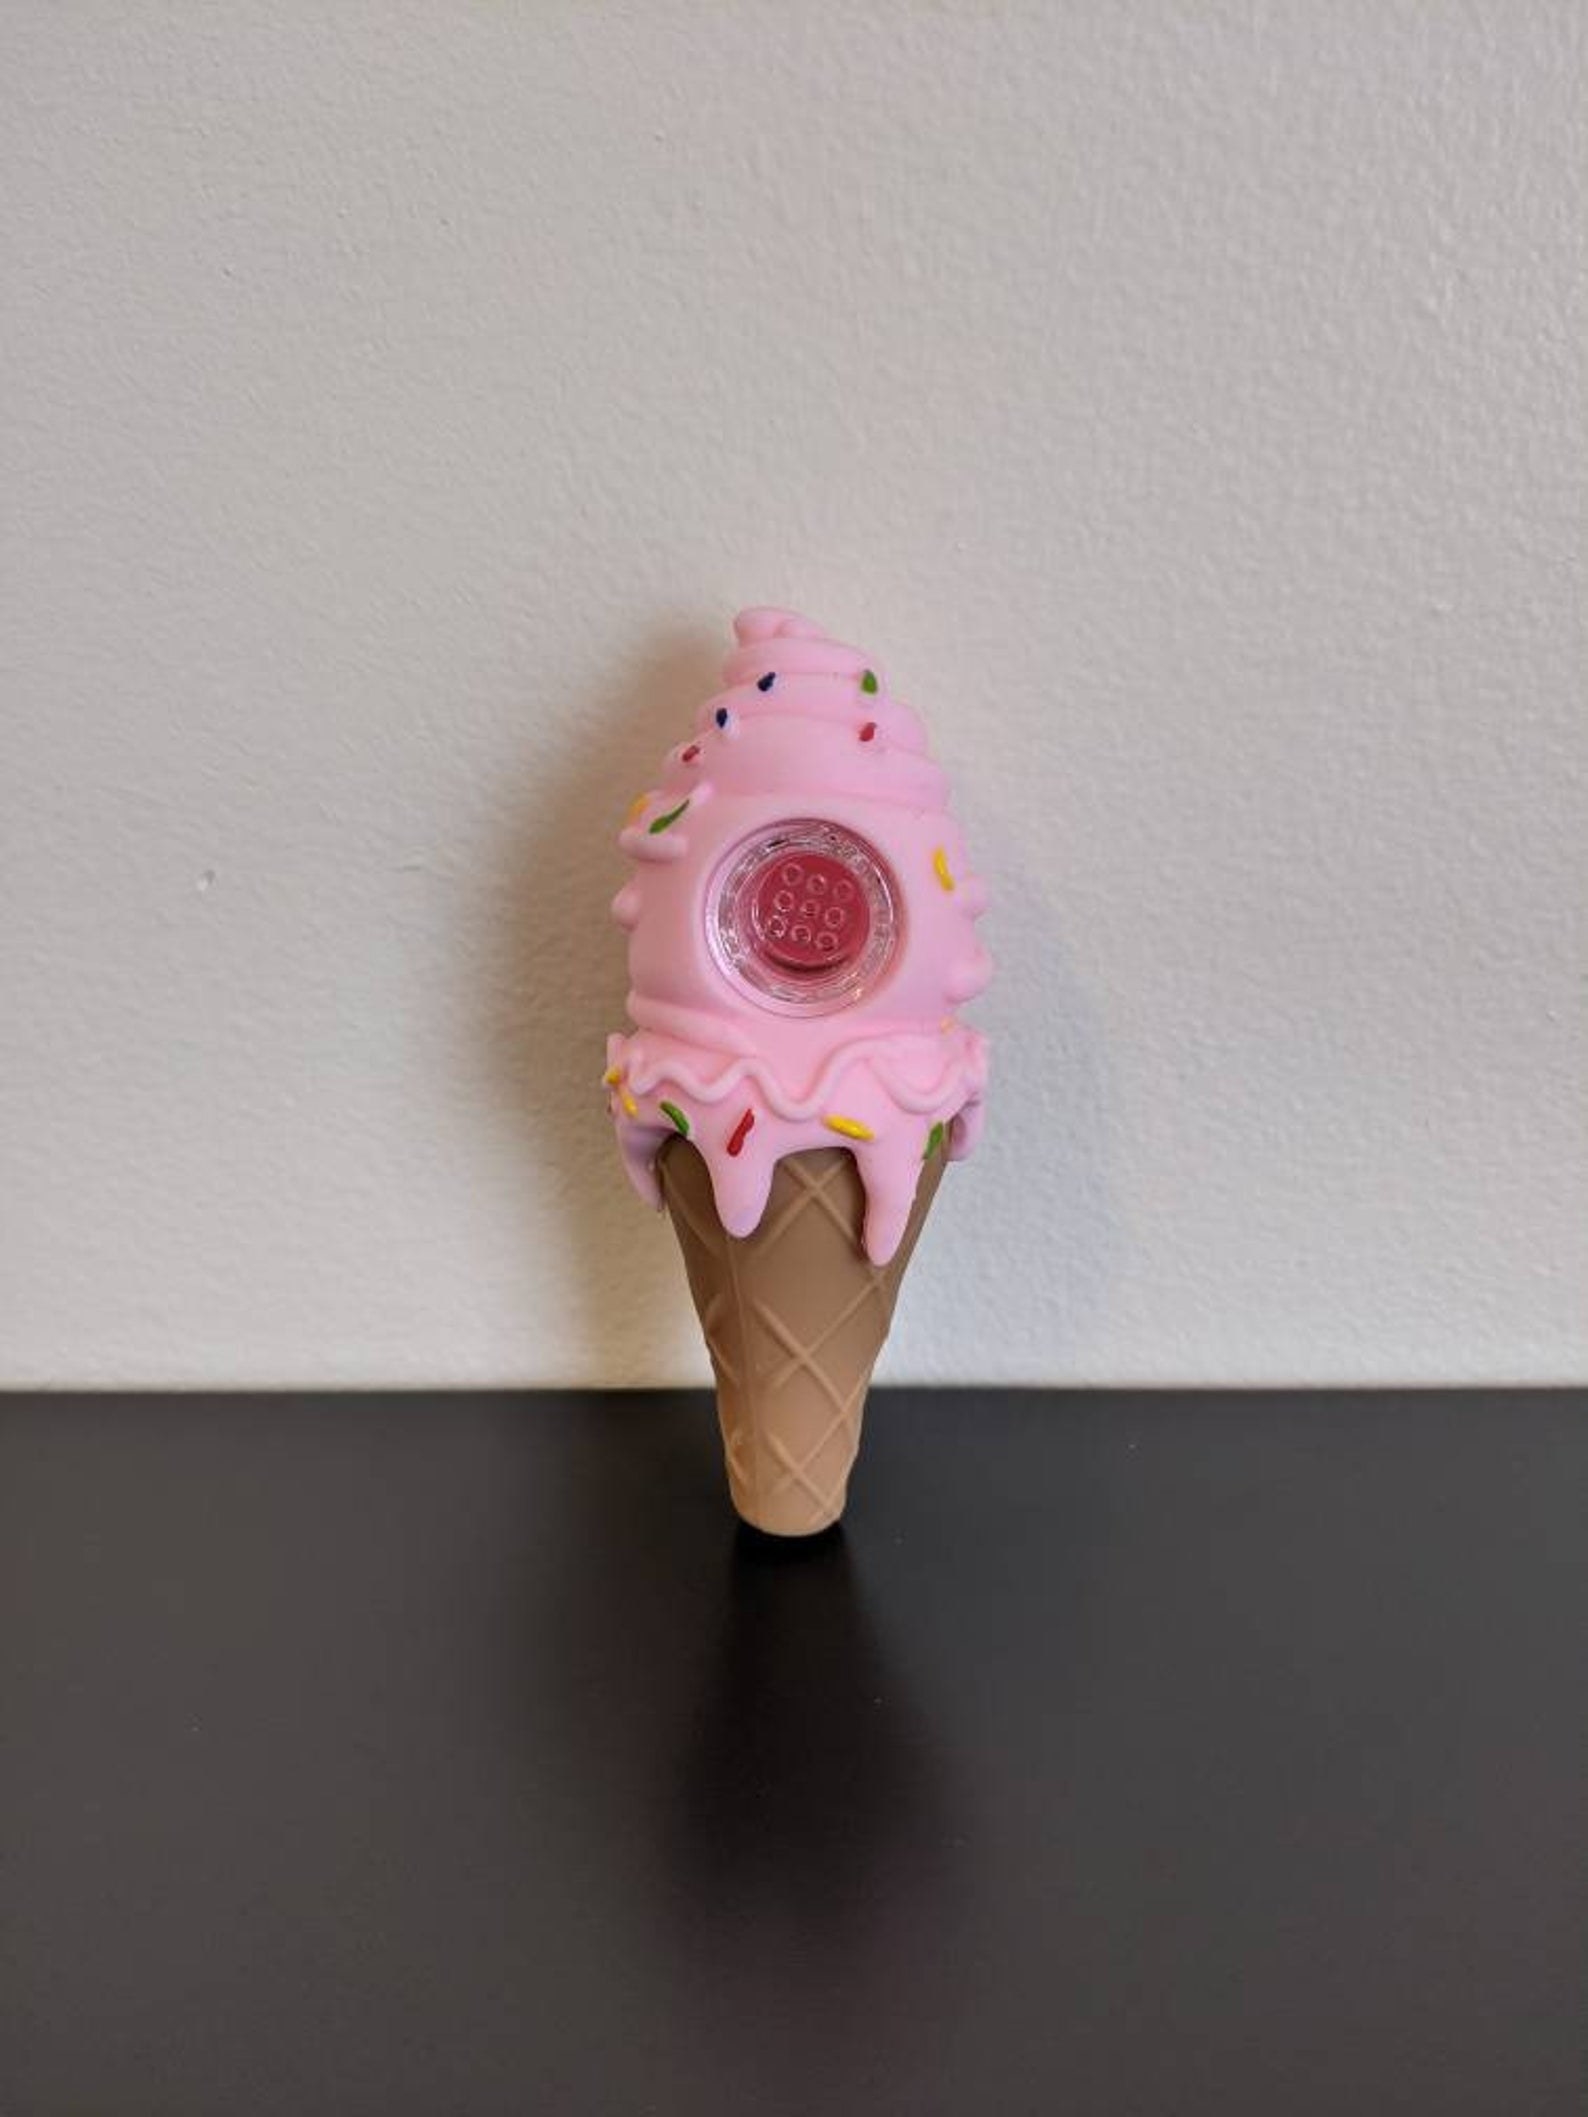 the ice cream cone-shaped pipe which has pink ice cream on top with colorful sprinkles